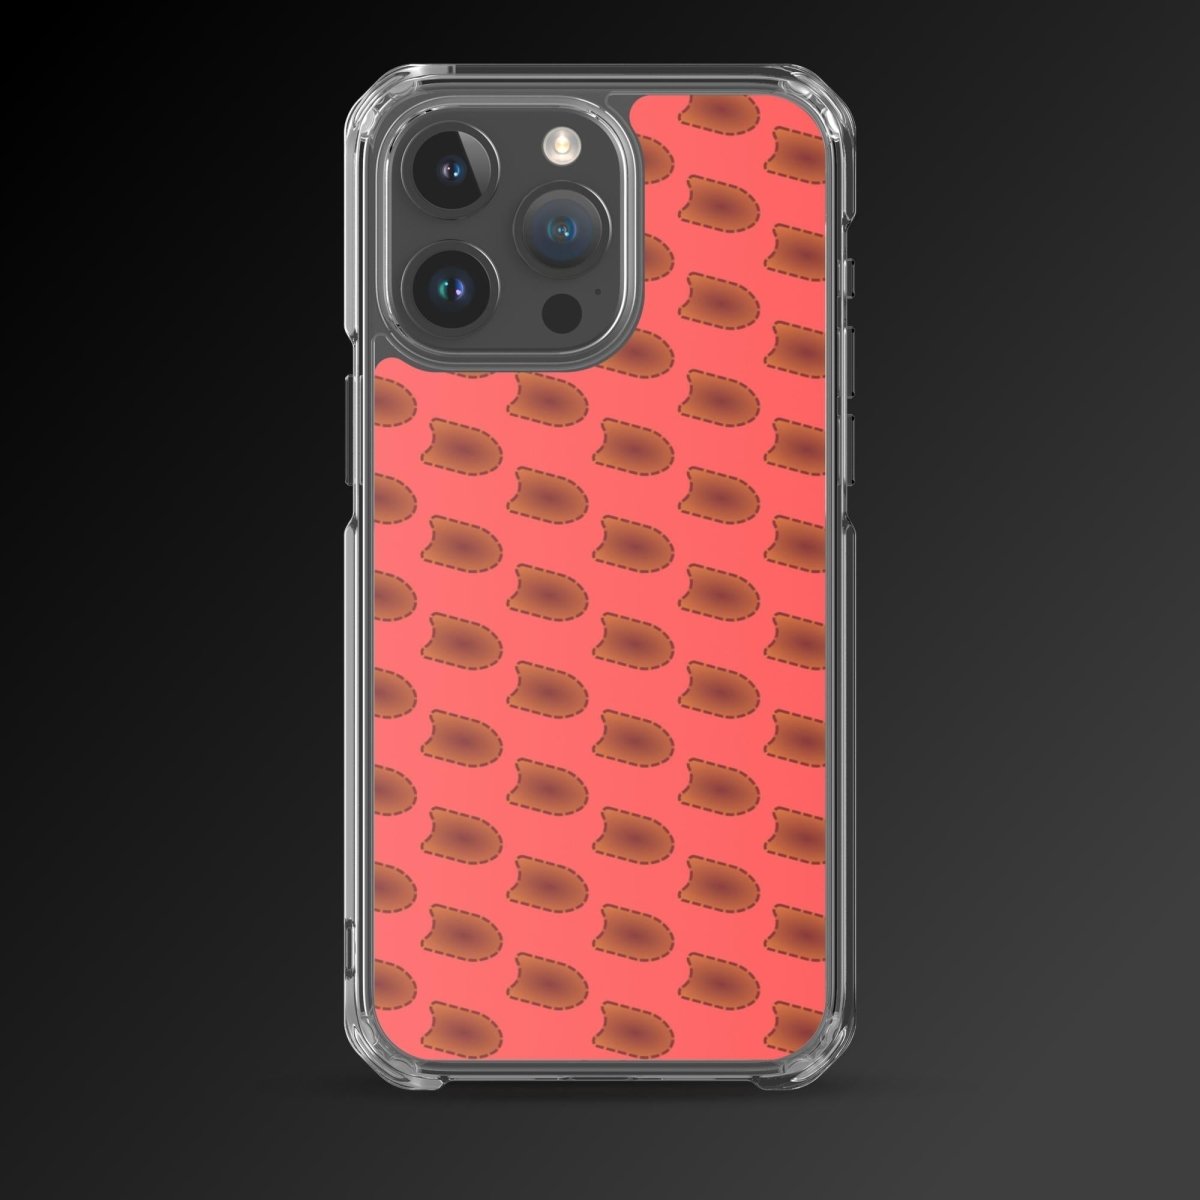 Pattern - Clear iPhone cases - Ever colorful